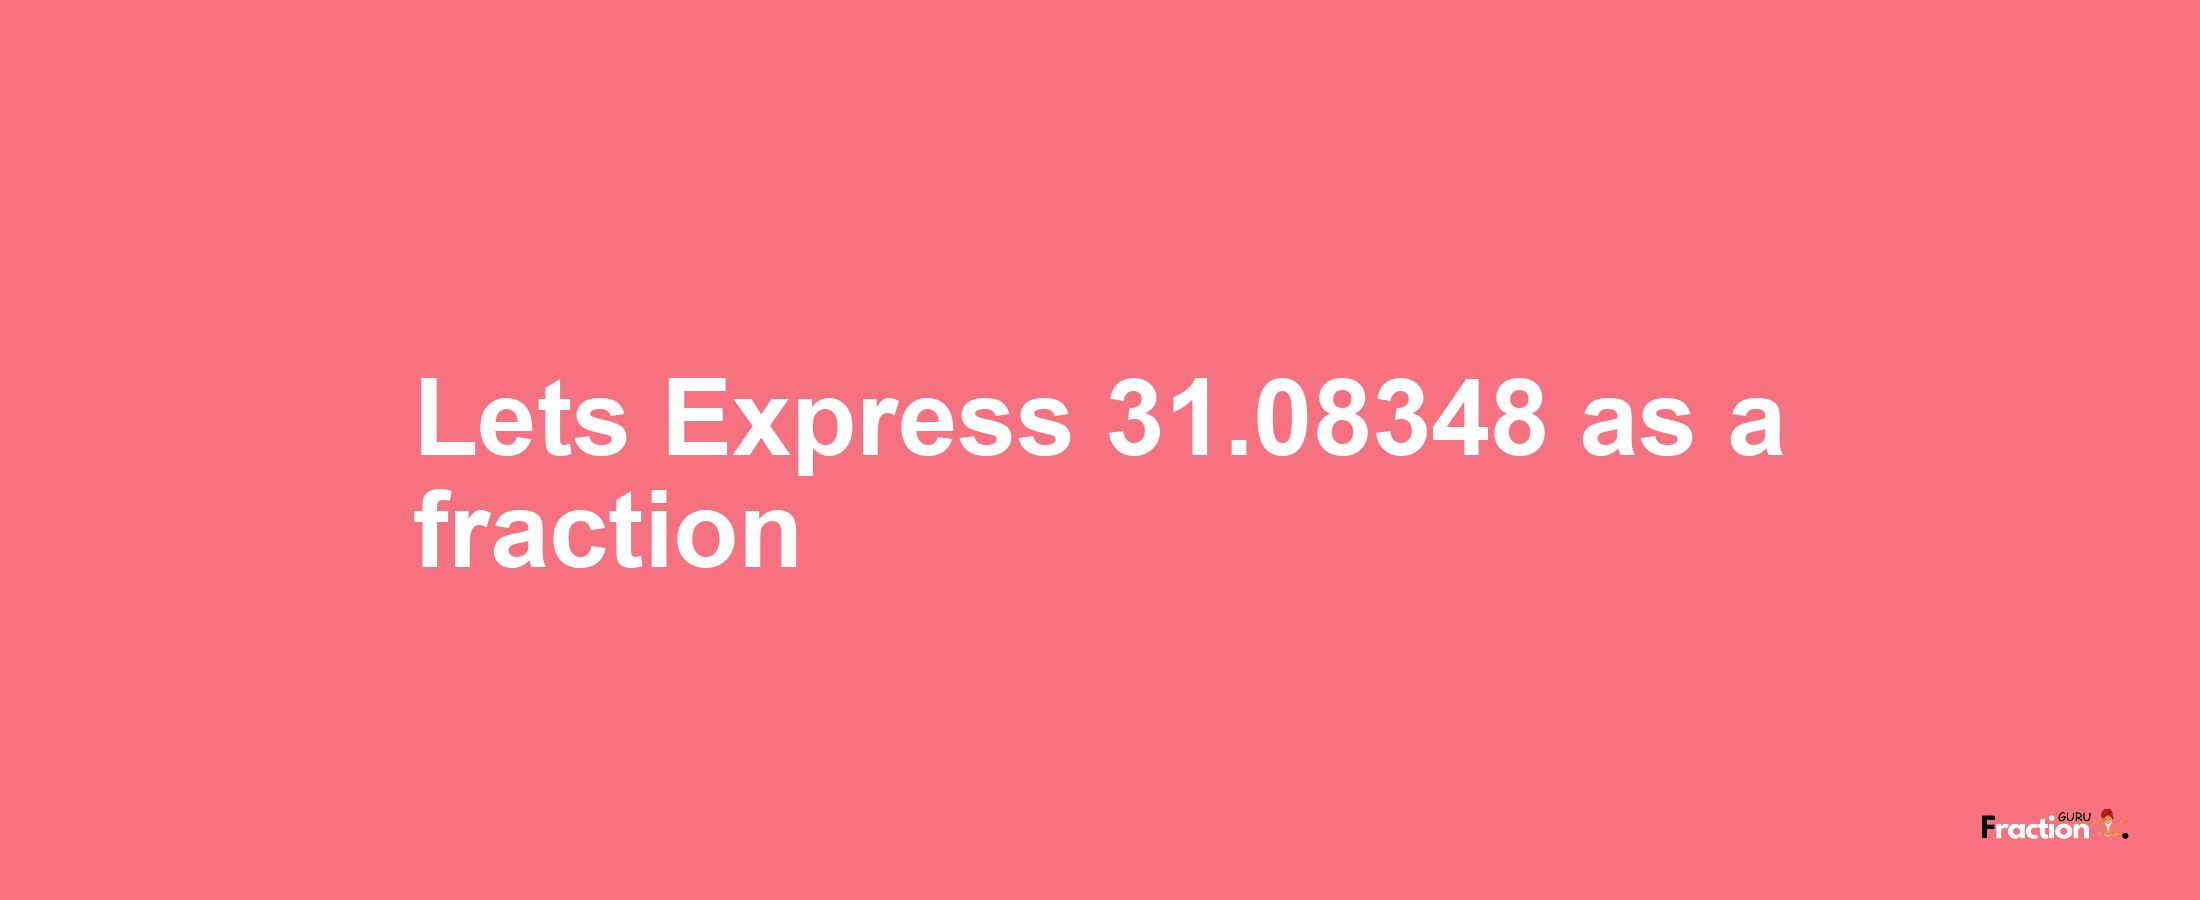 Lets Express 31.08348 as afraction